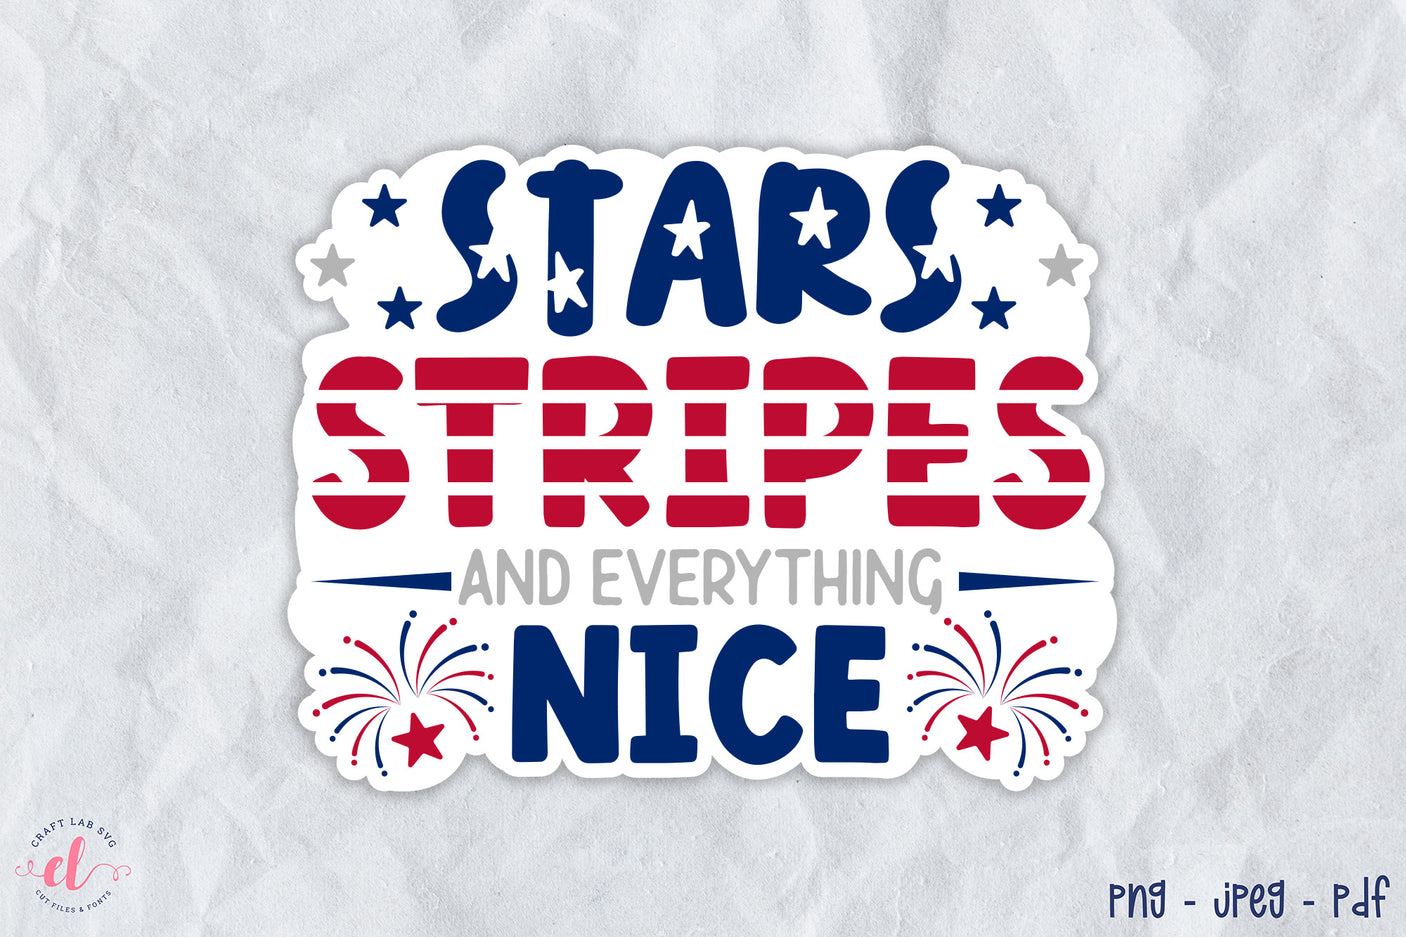 4th of July Sticker, Stars Stripes and everything nice